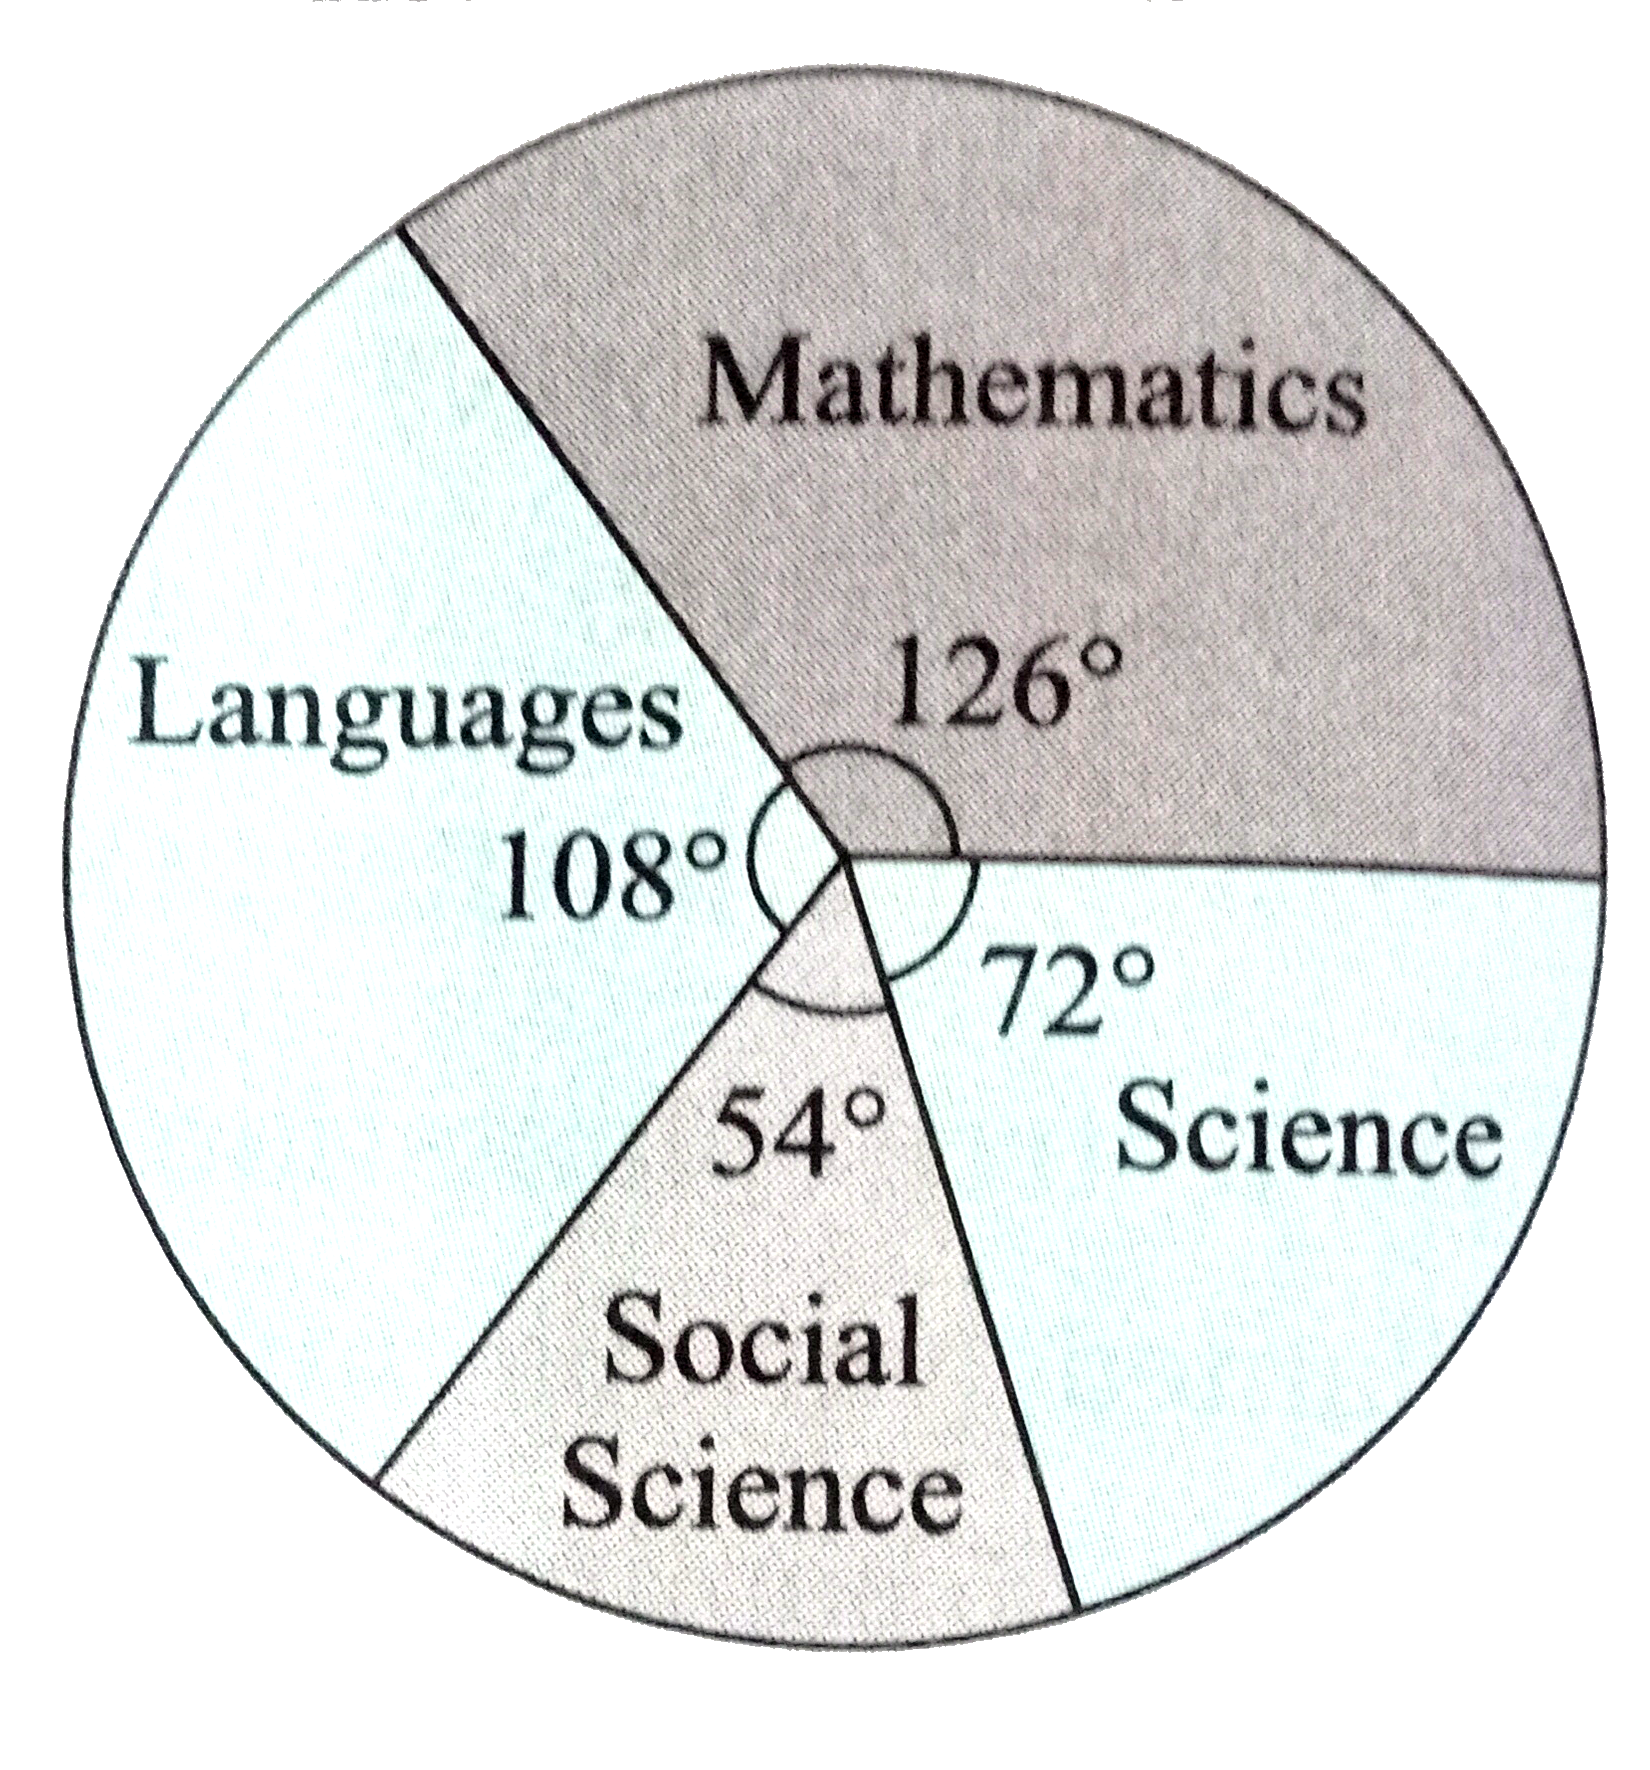 A survey was  conducted in Aadarsh Vidyalaya to know  the inclination of students  towards different subjects. The data obtained is presented by the adjacent pie diagram. If the total number of students was 500, answer the following question.       (i) How many students show inclination towards mathematics ?   (ii) How many students are inclined towards social science ?   (iii) How many more students are inclined towards languages than science ?